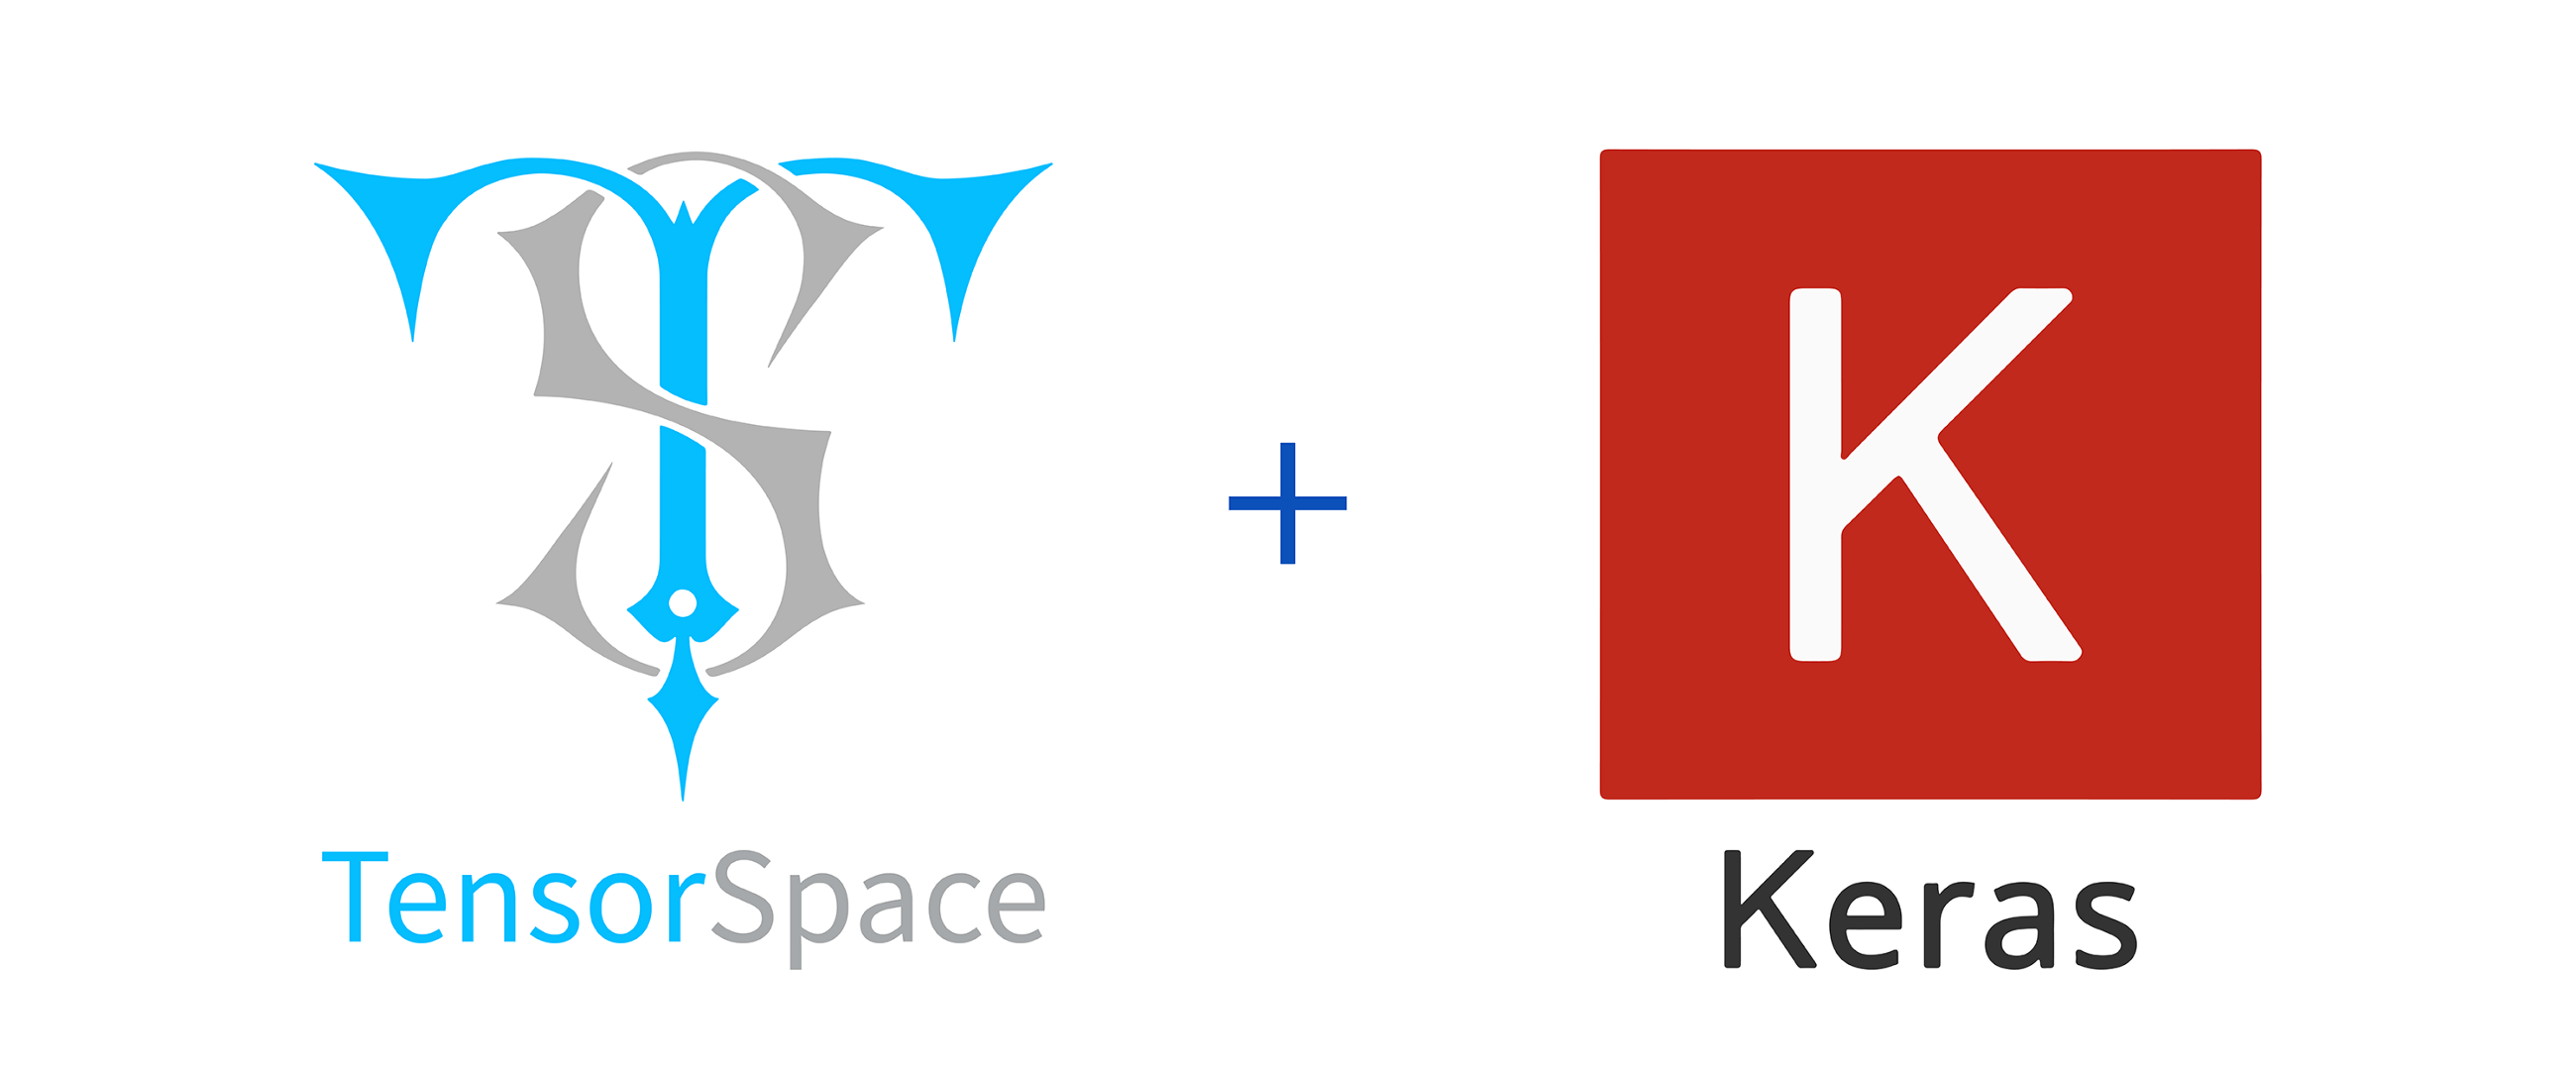 featured image - Preprocess Keras Model for TensorSpace